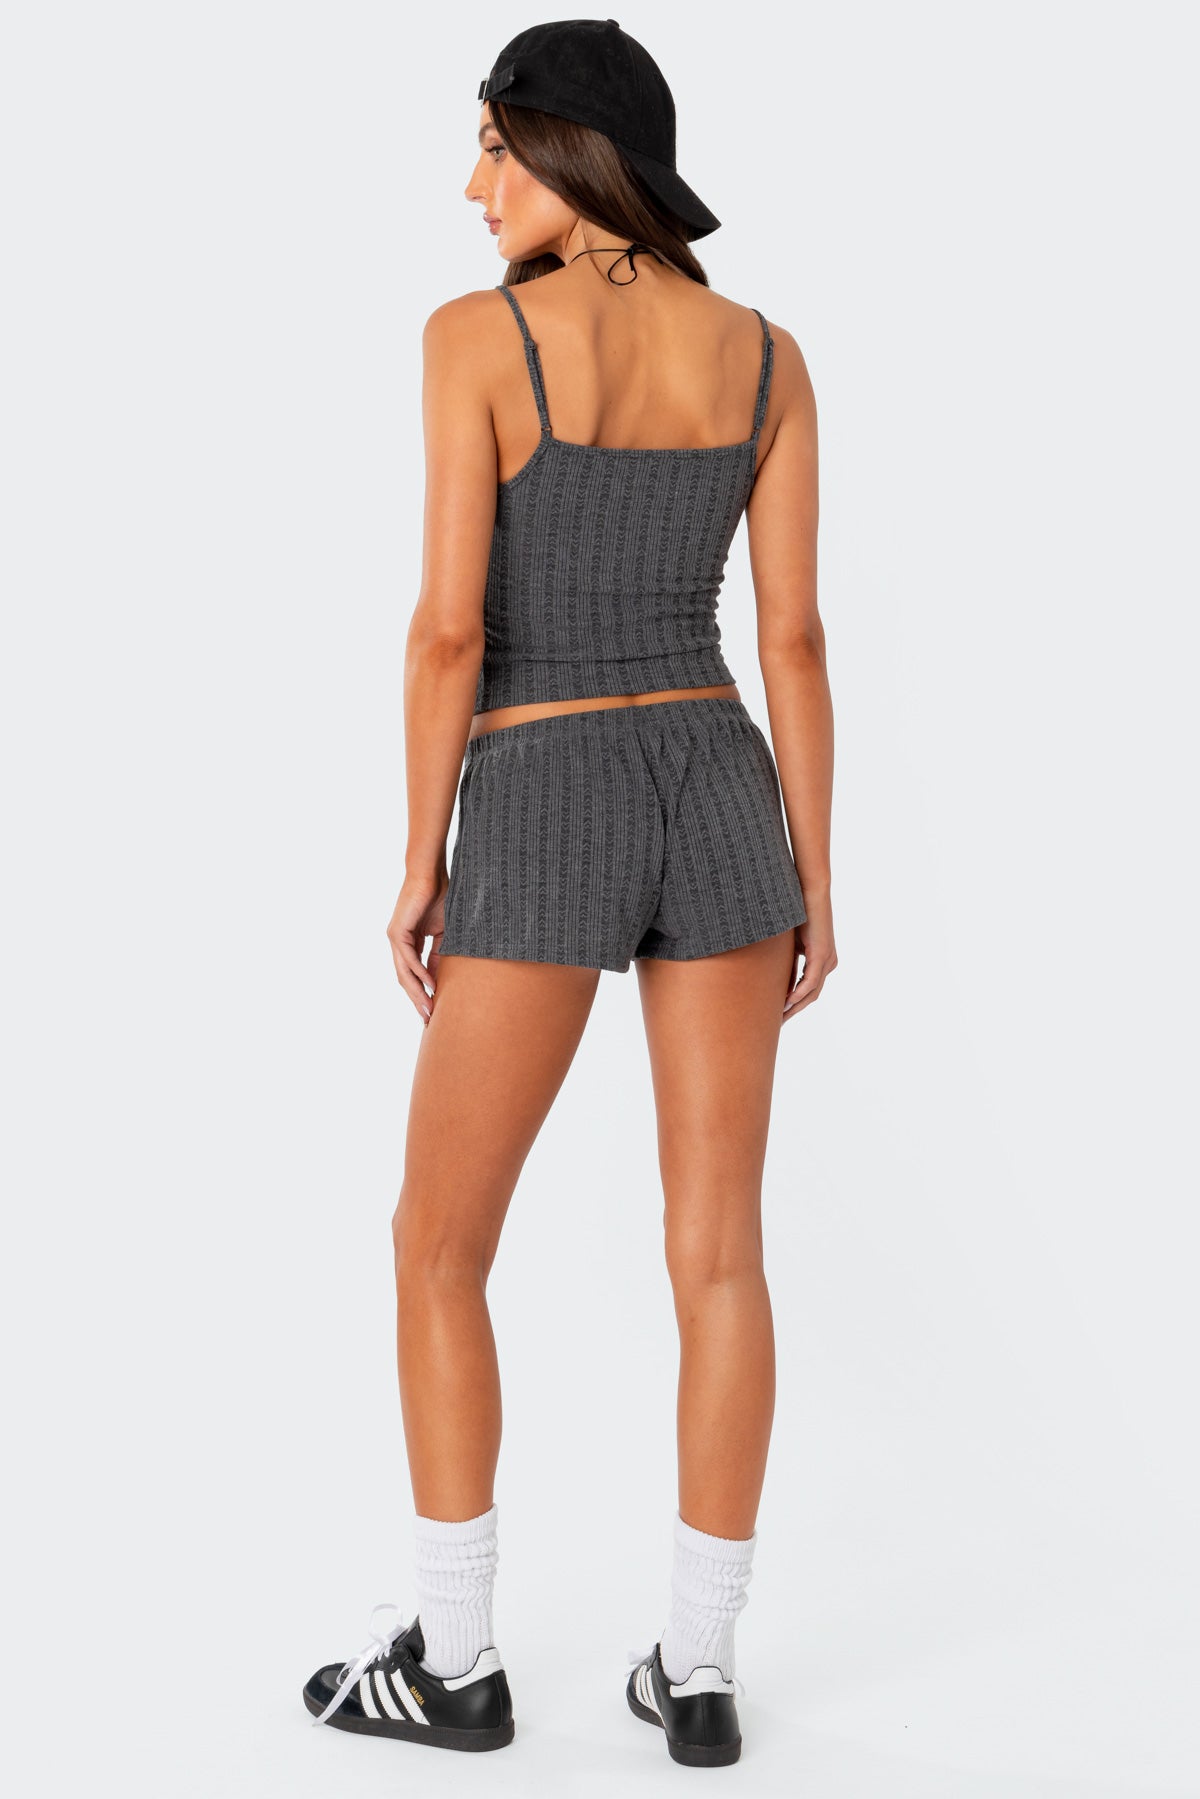 Irene Low Rise Pointelle Micro Shorts